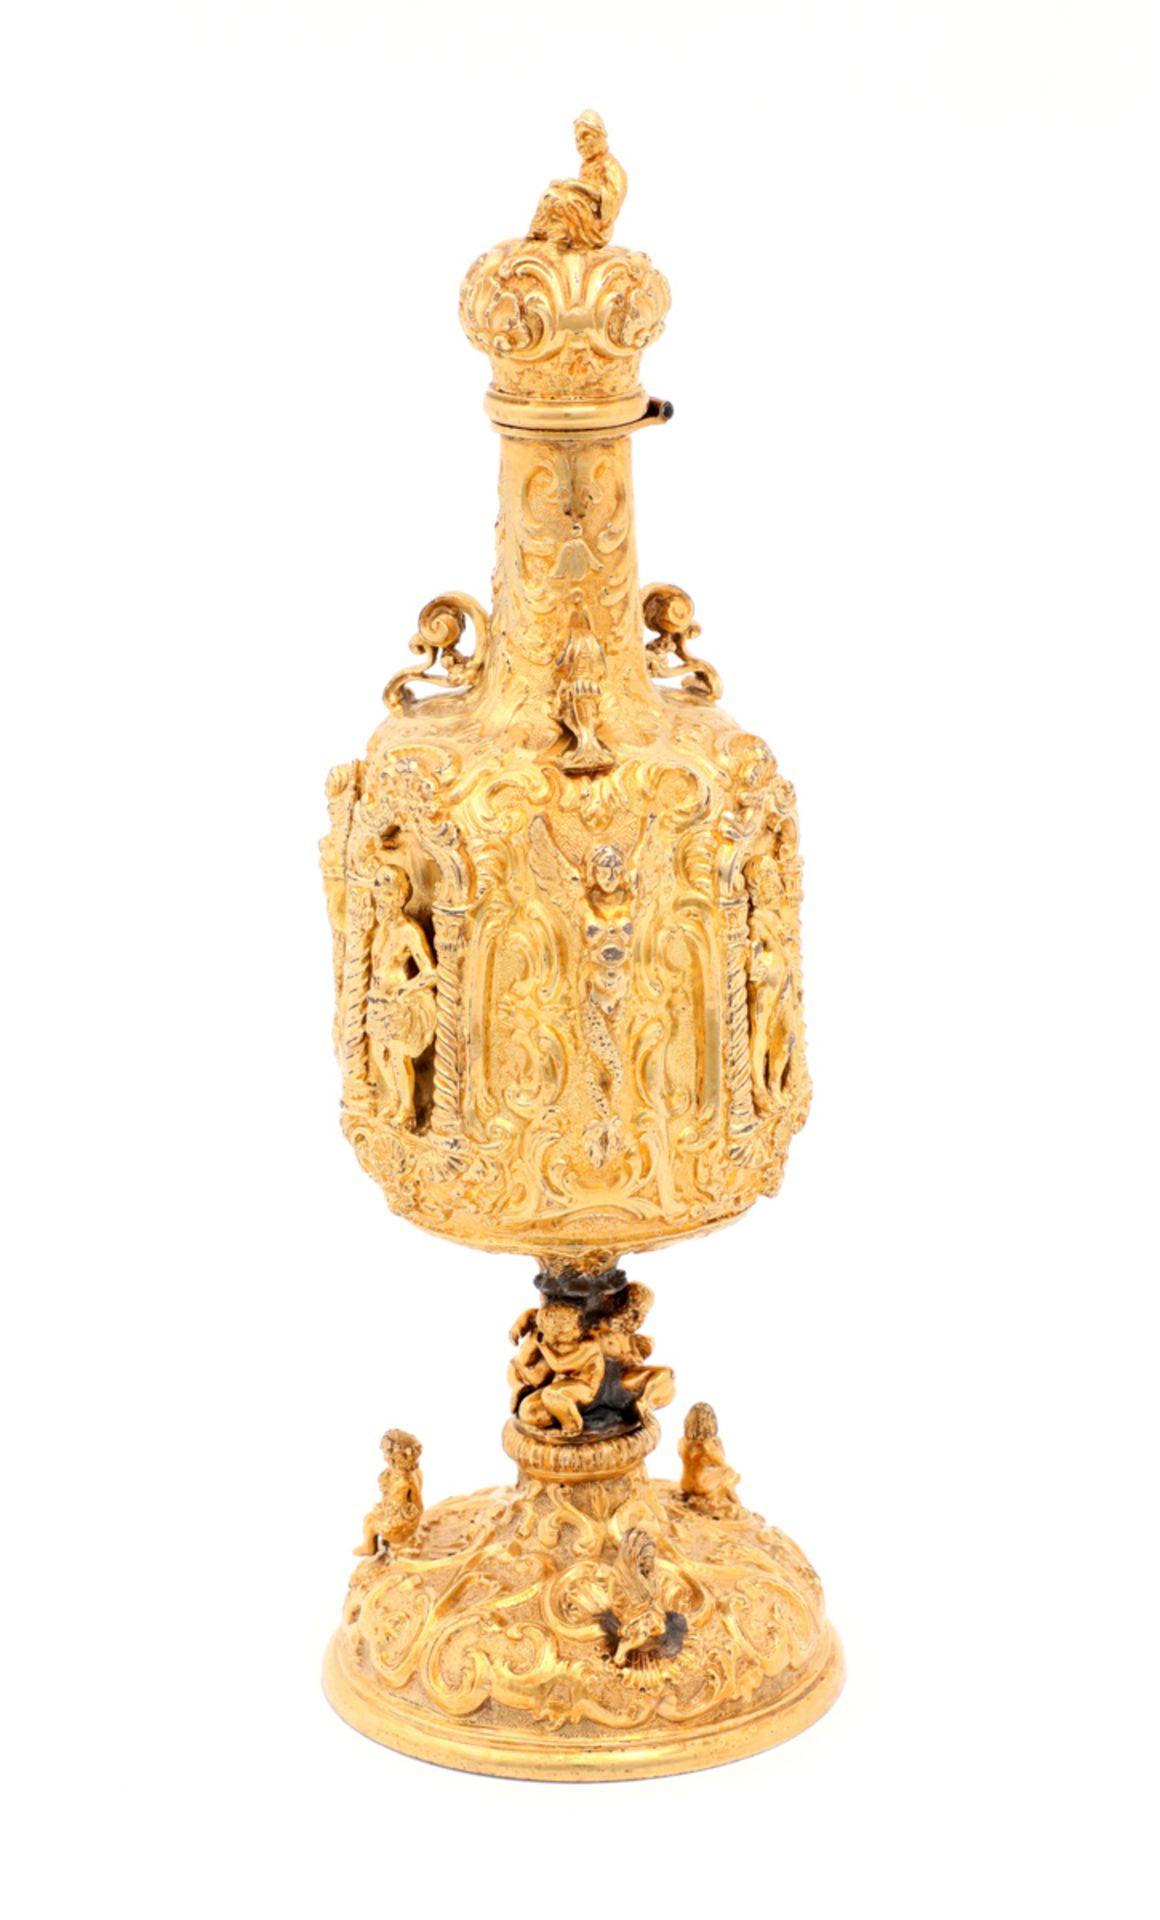 A VERMEIL INCENSE BURNER Gilt silver, decoration in relief depicting Classical figures, after a